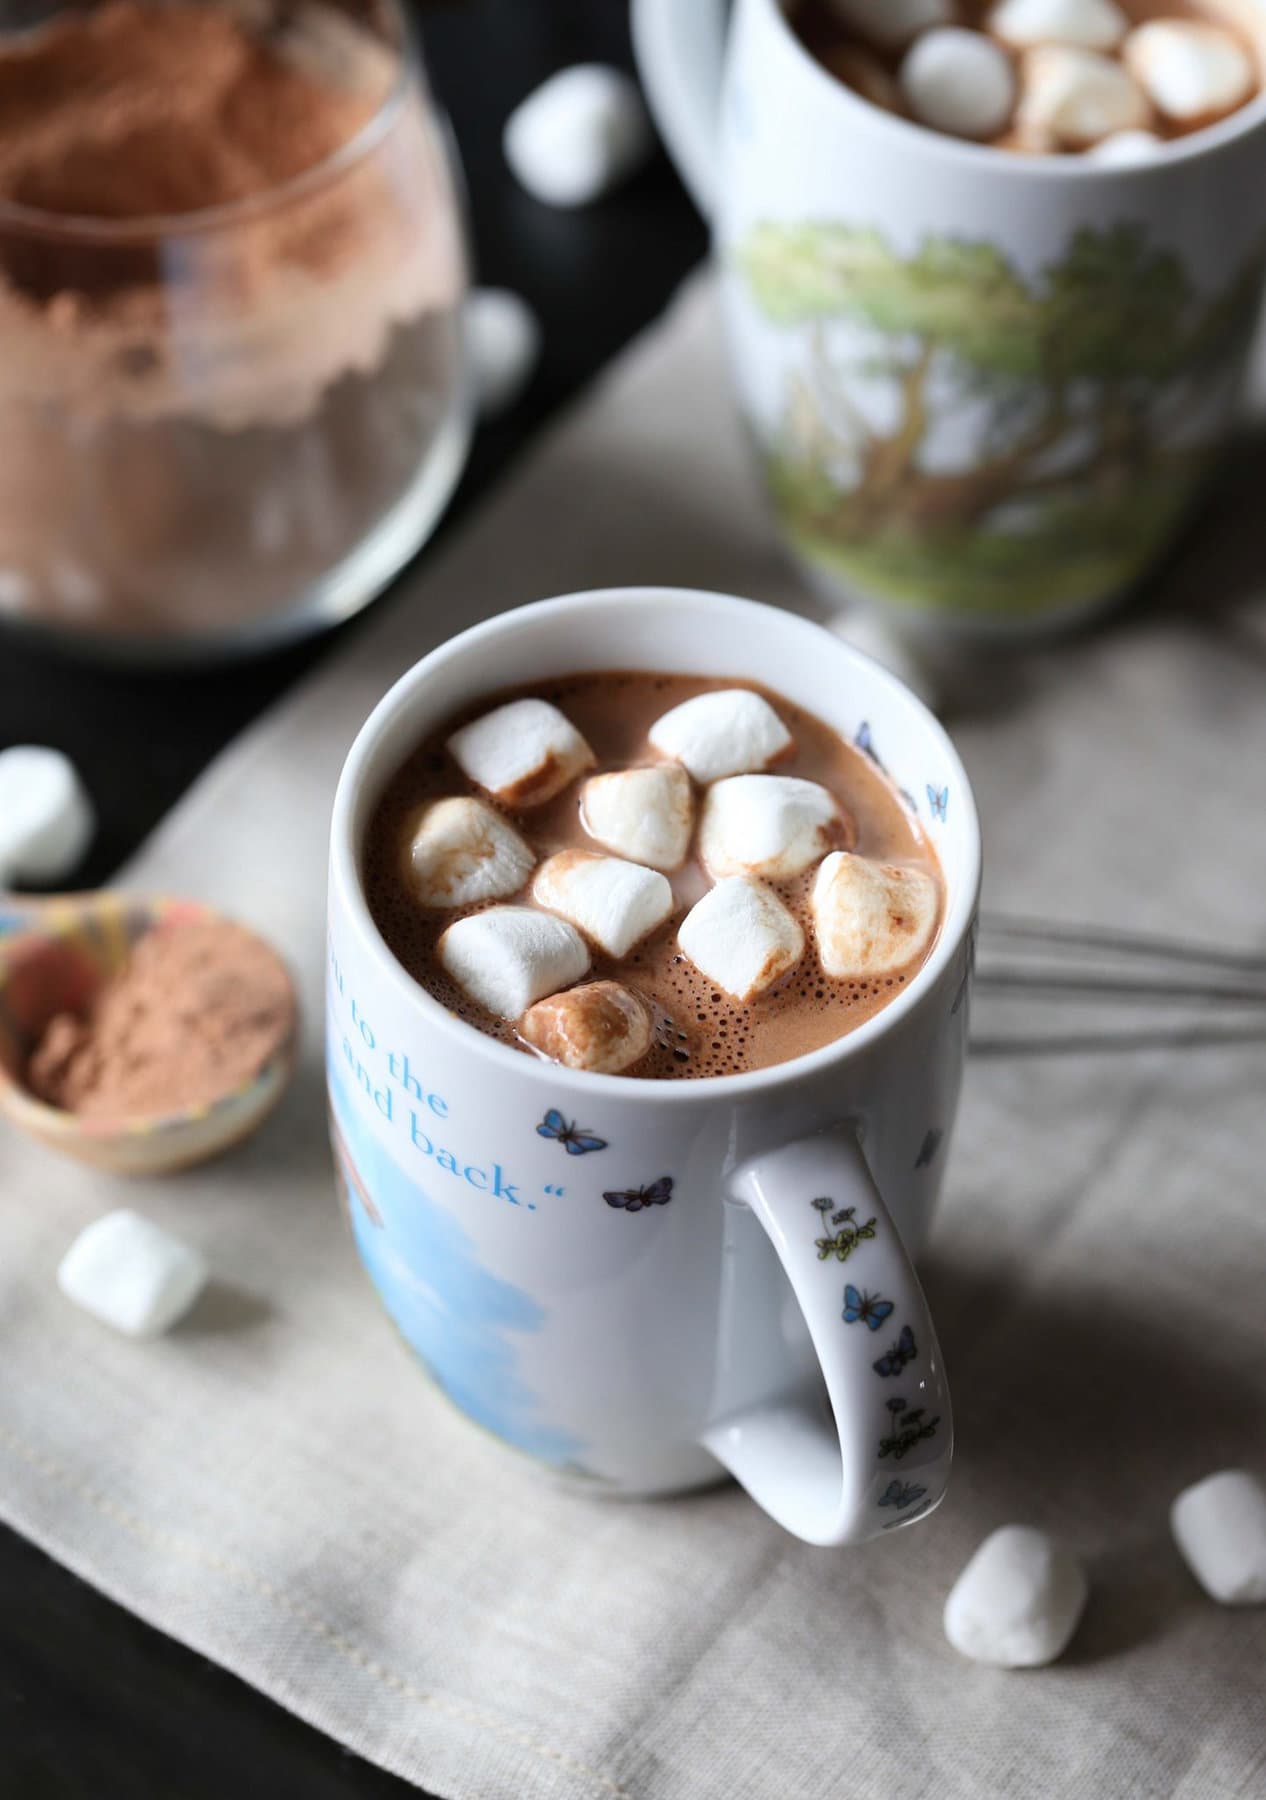 A mug of homemade hot cocoa topped with mini marshmallows, next to a jar of hot chocolate mix and a second mug of hot cocoa in the background.